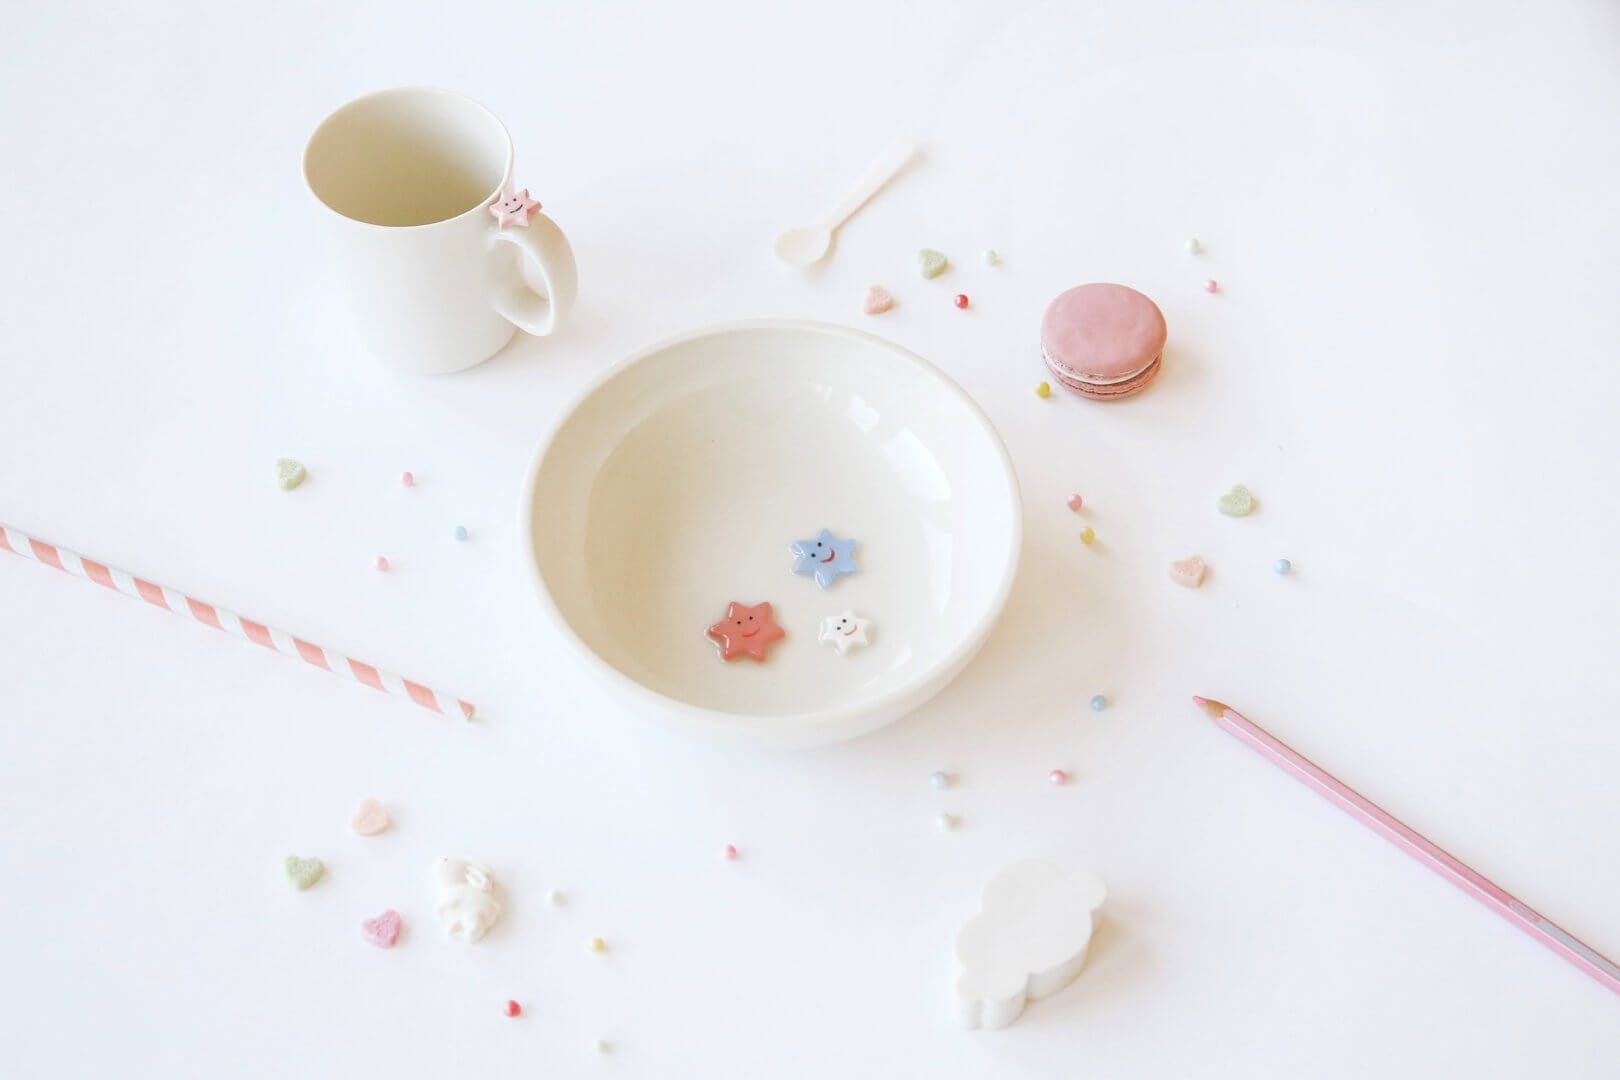 Smiling Table ceramics - a handmade bowl and mug decorated with smiling stars set amongst pretty pastel accessories on a clean white background.